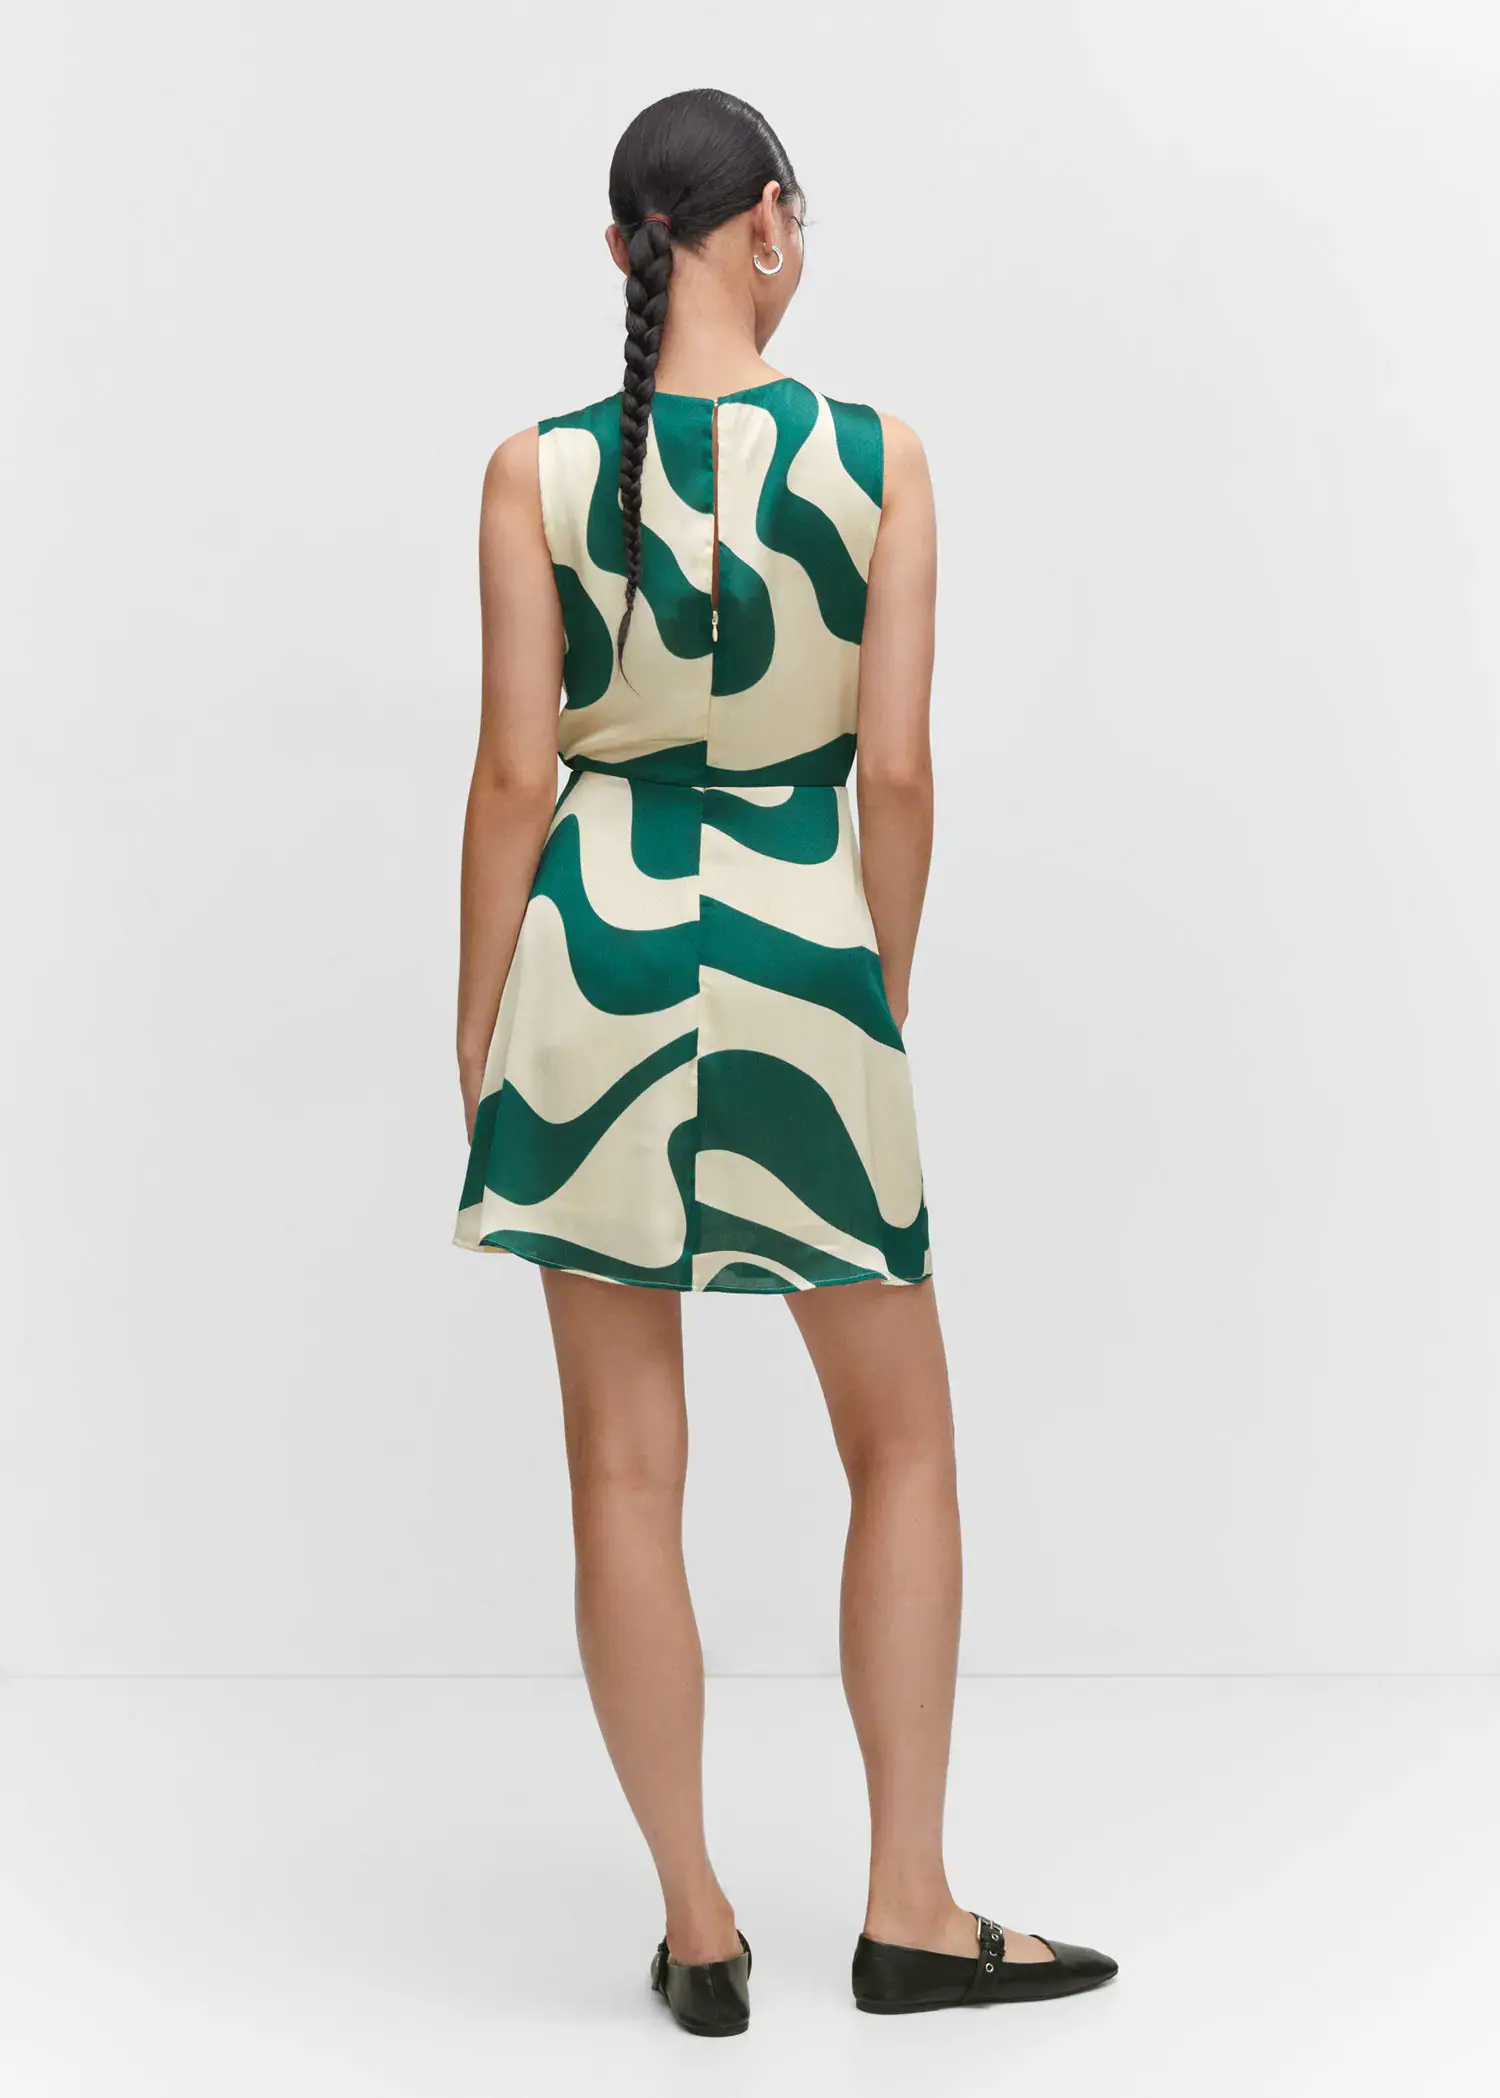 Mango Printed dress with pleated details. 3